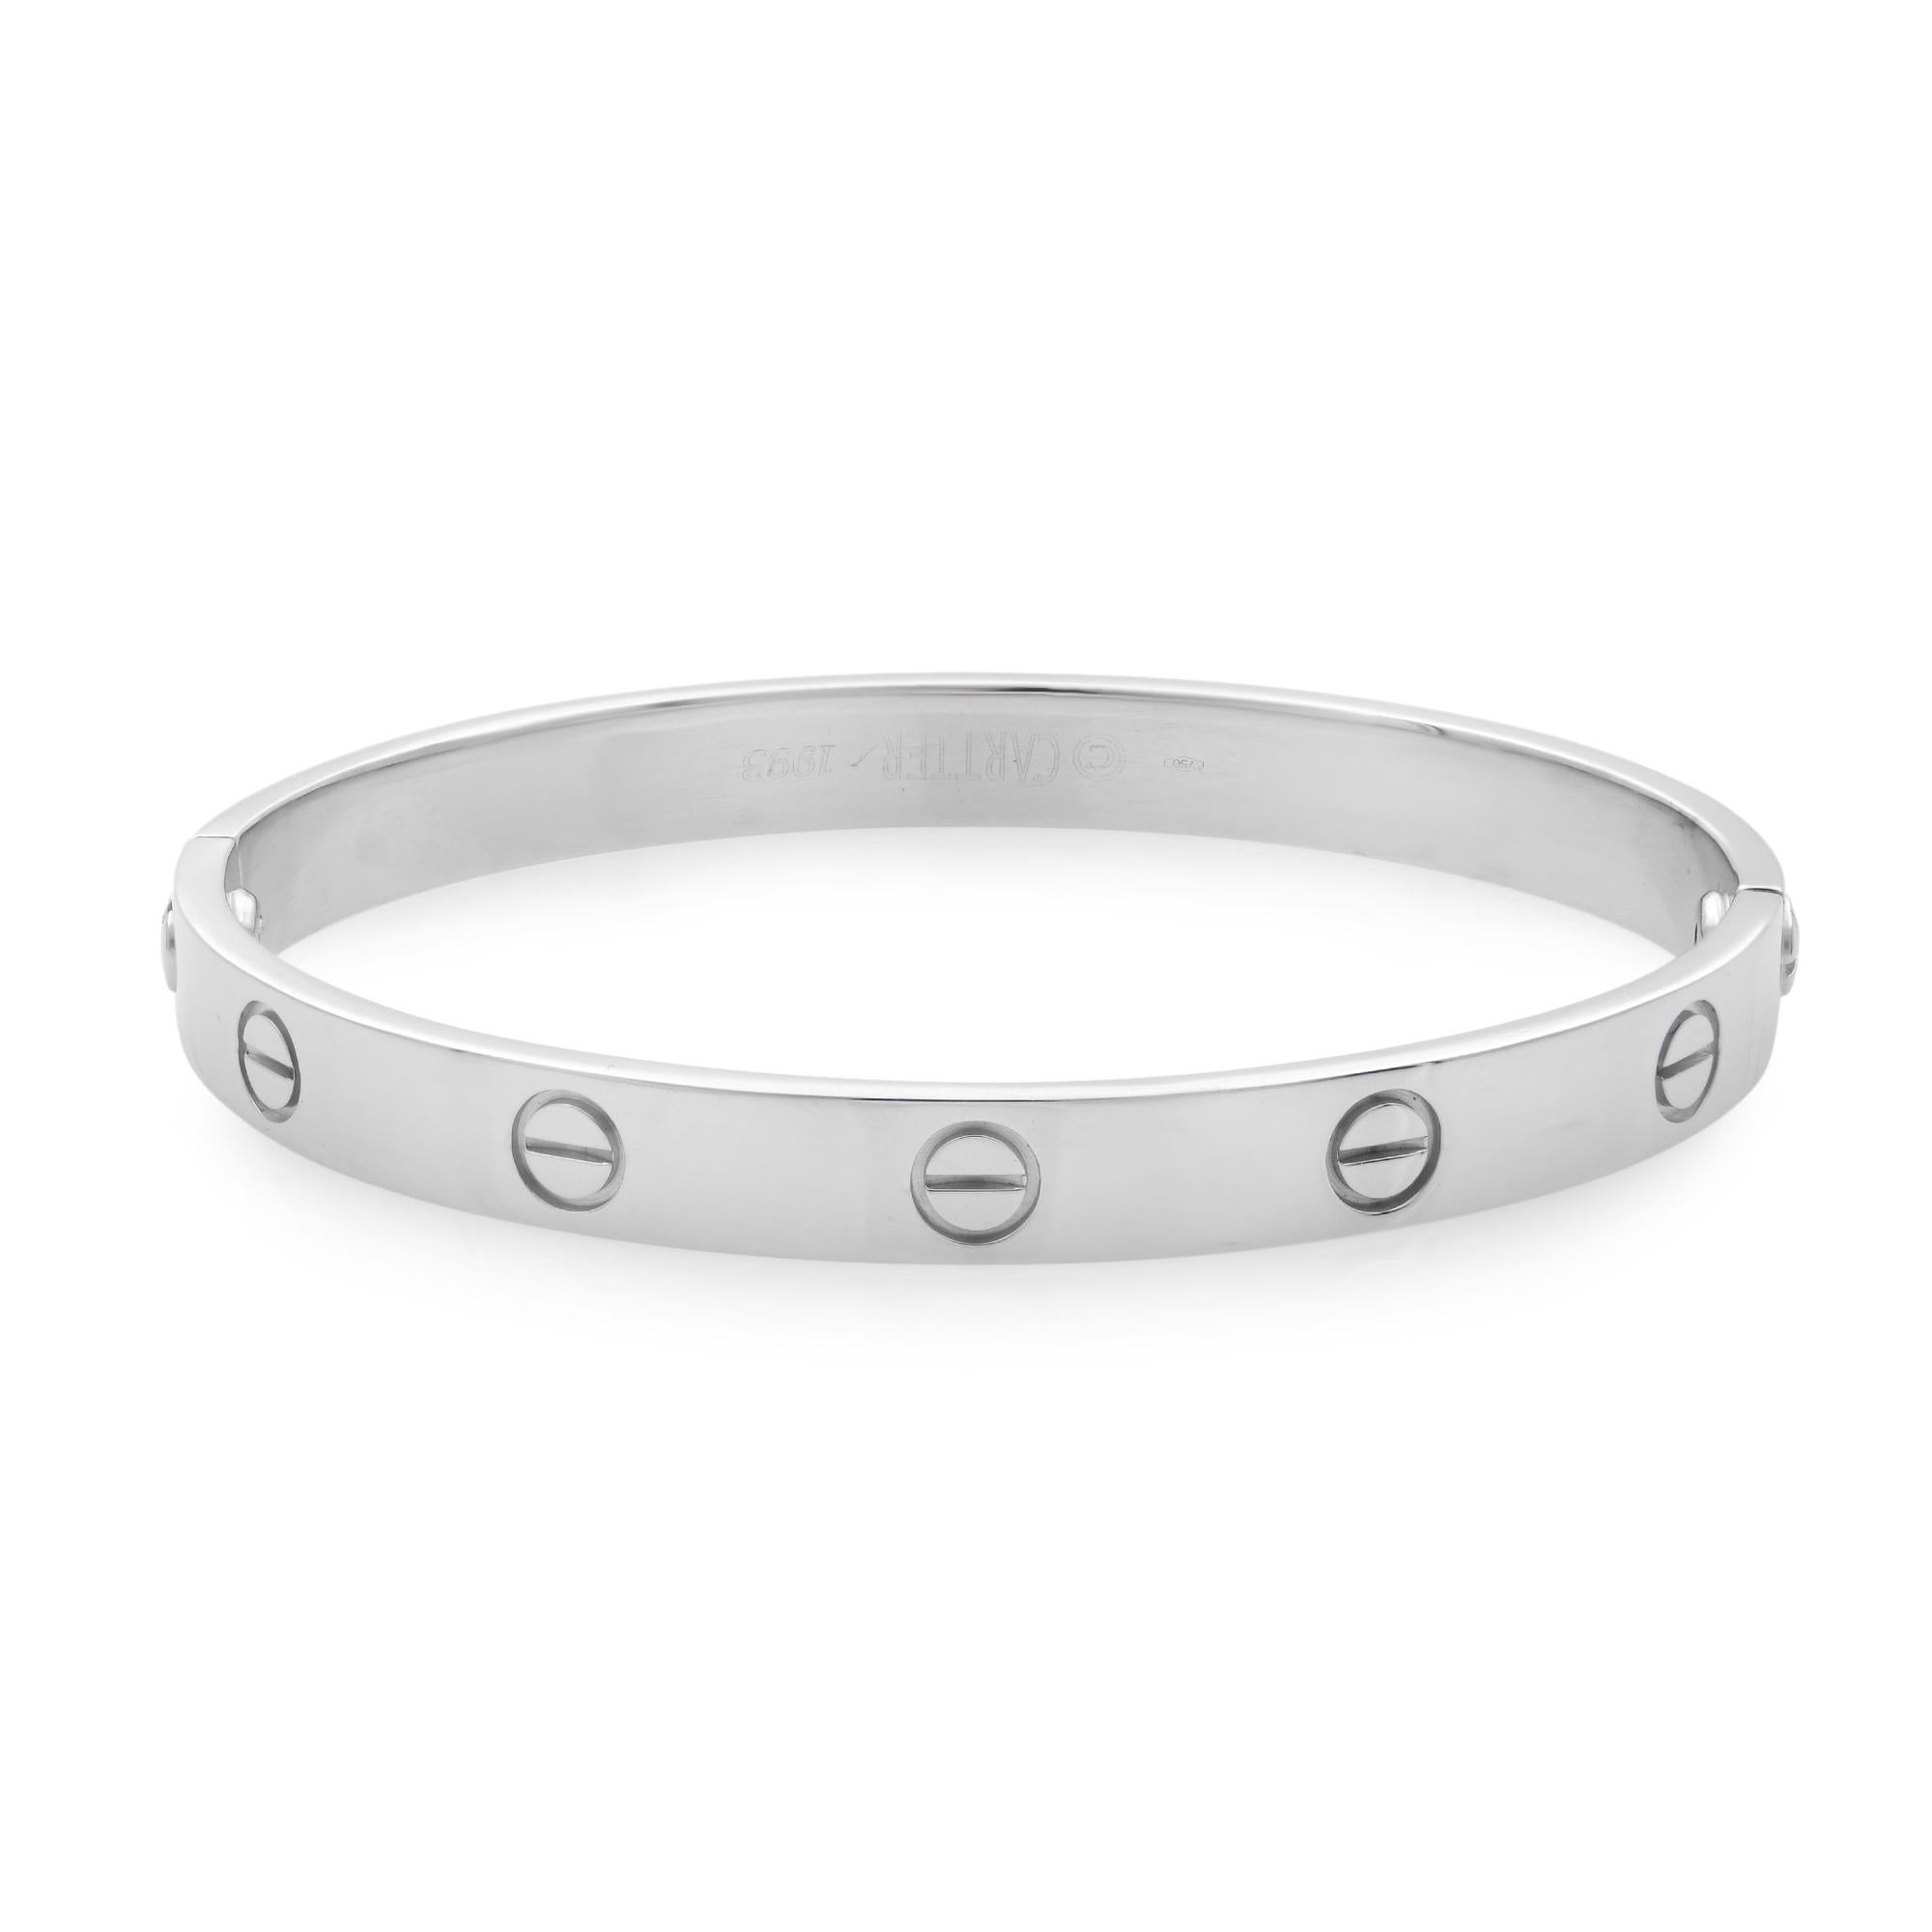 Cartier Love bracelet in 18K white gold.
Pre-owned, with old screw style closure. Looks great. Comes with box but without screwdriver and papers.
Size: 17